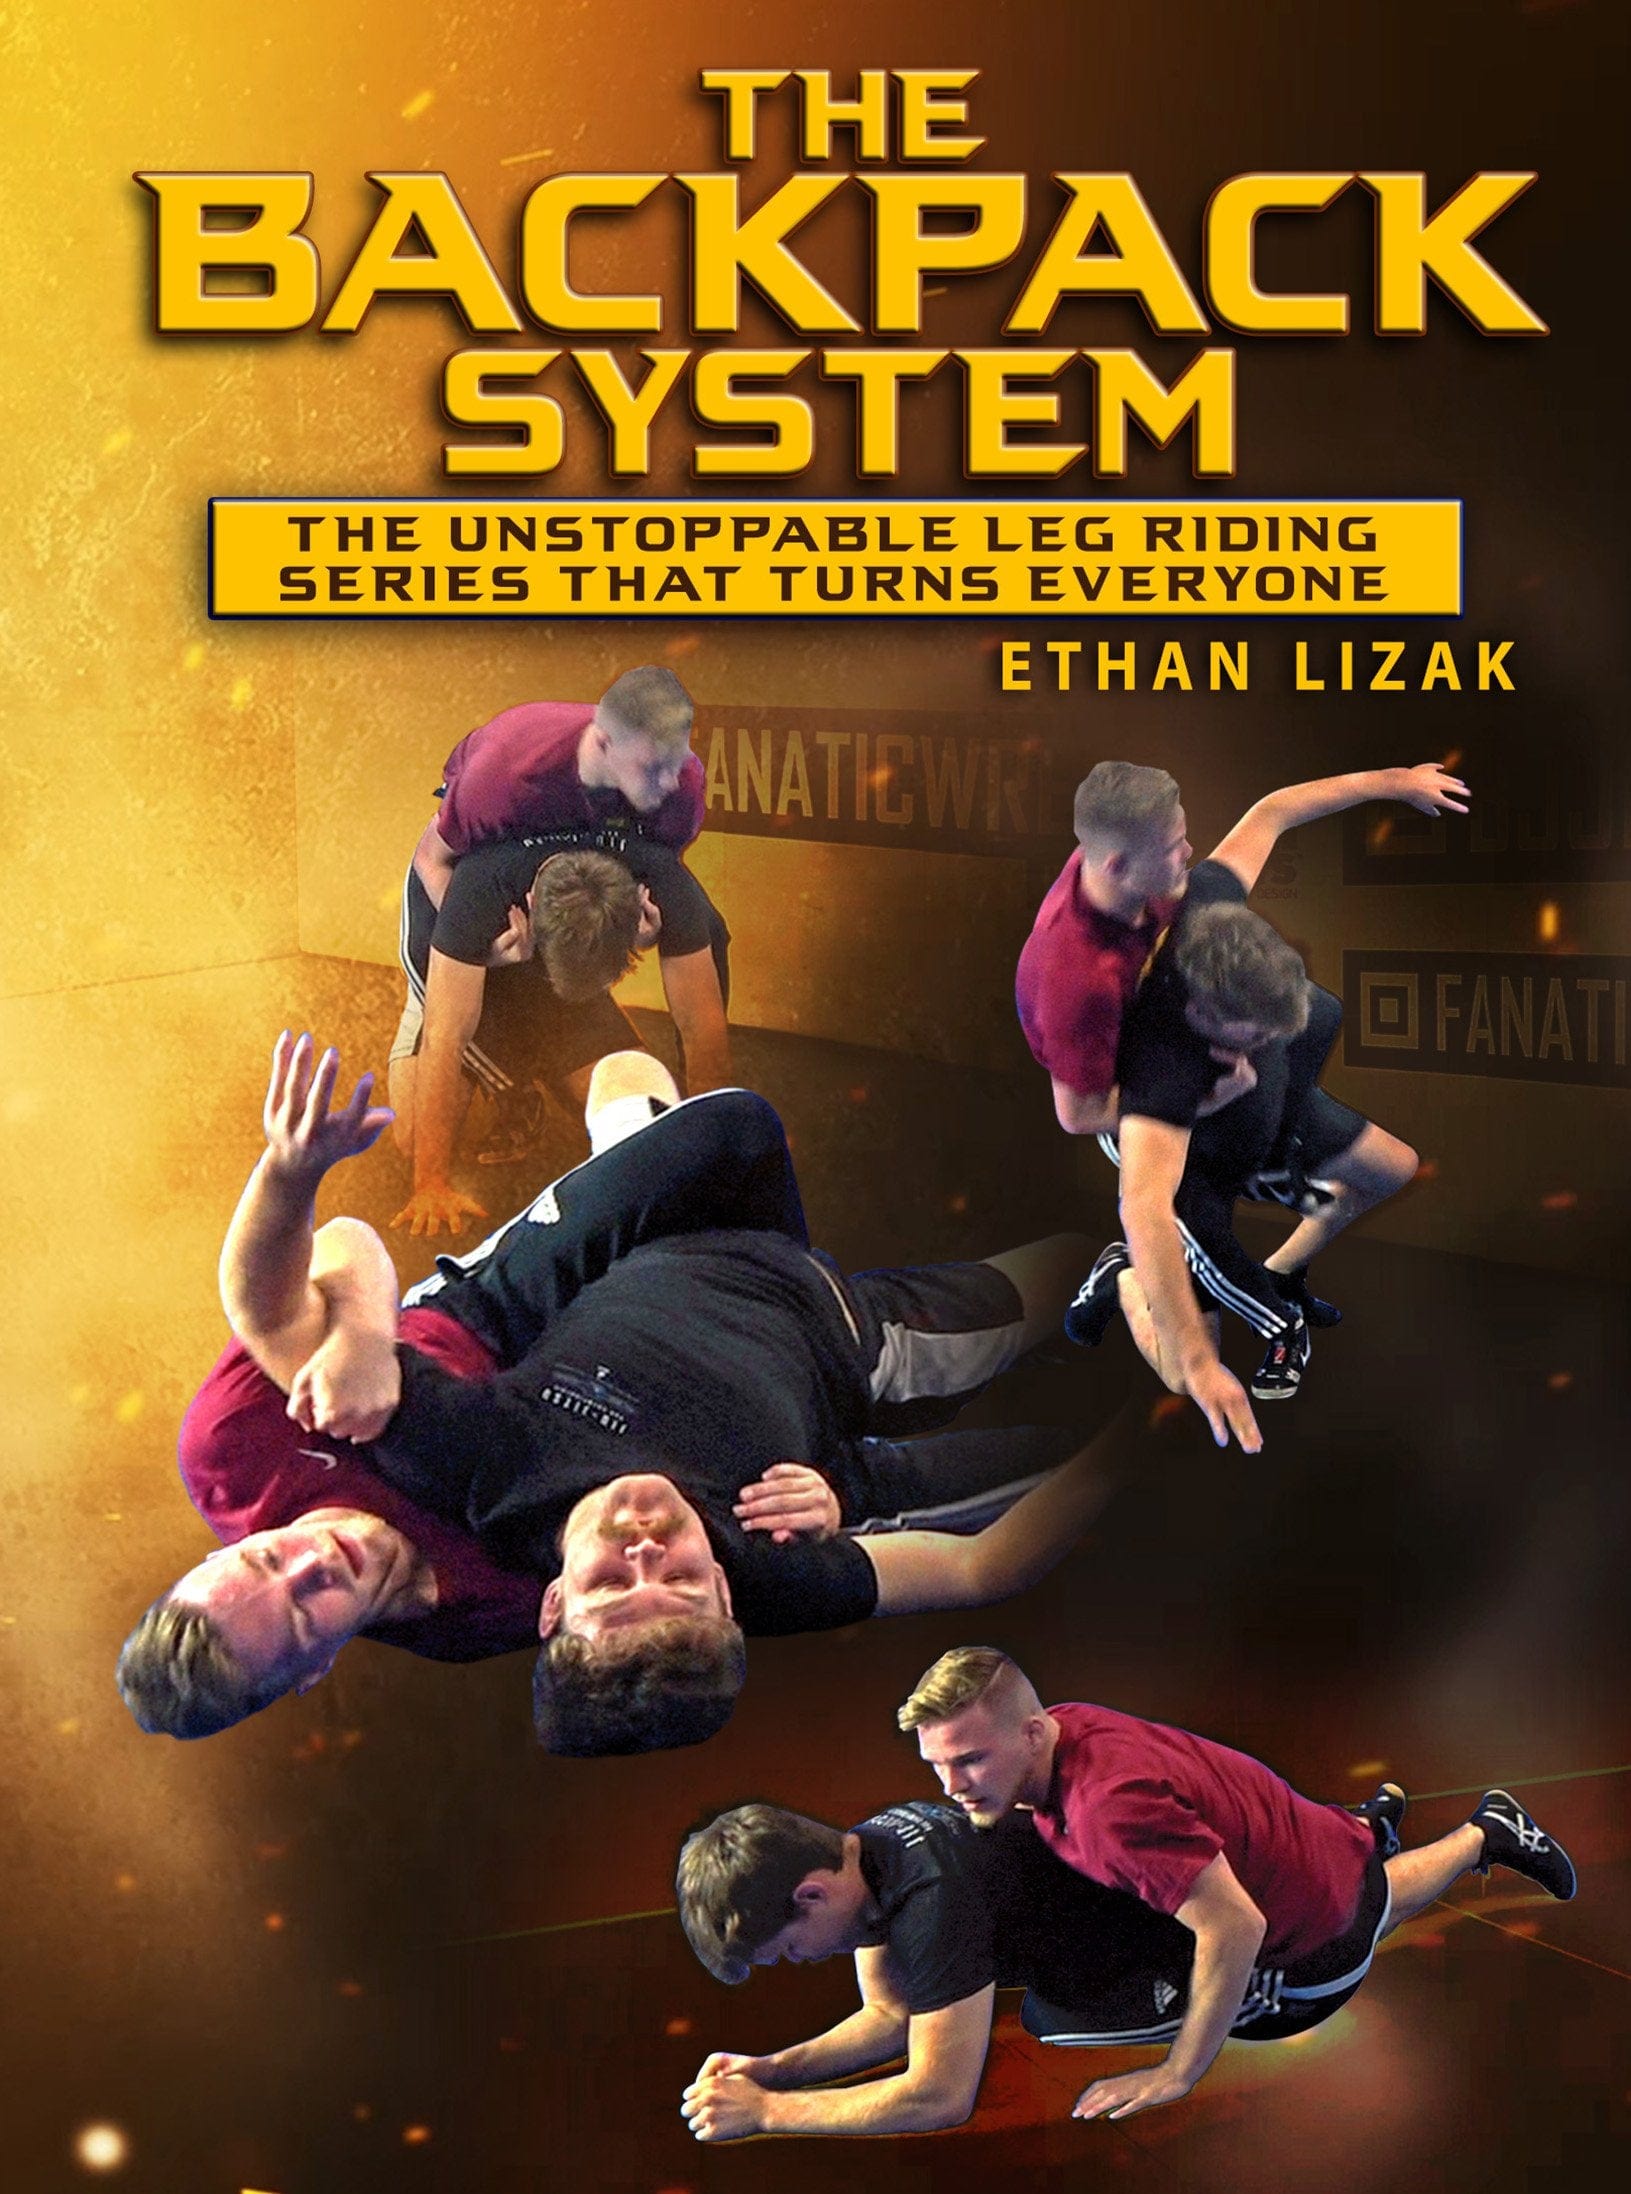 The Backpack System by Ethan Lizak - Fanatic Wrestling